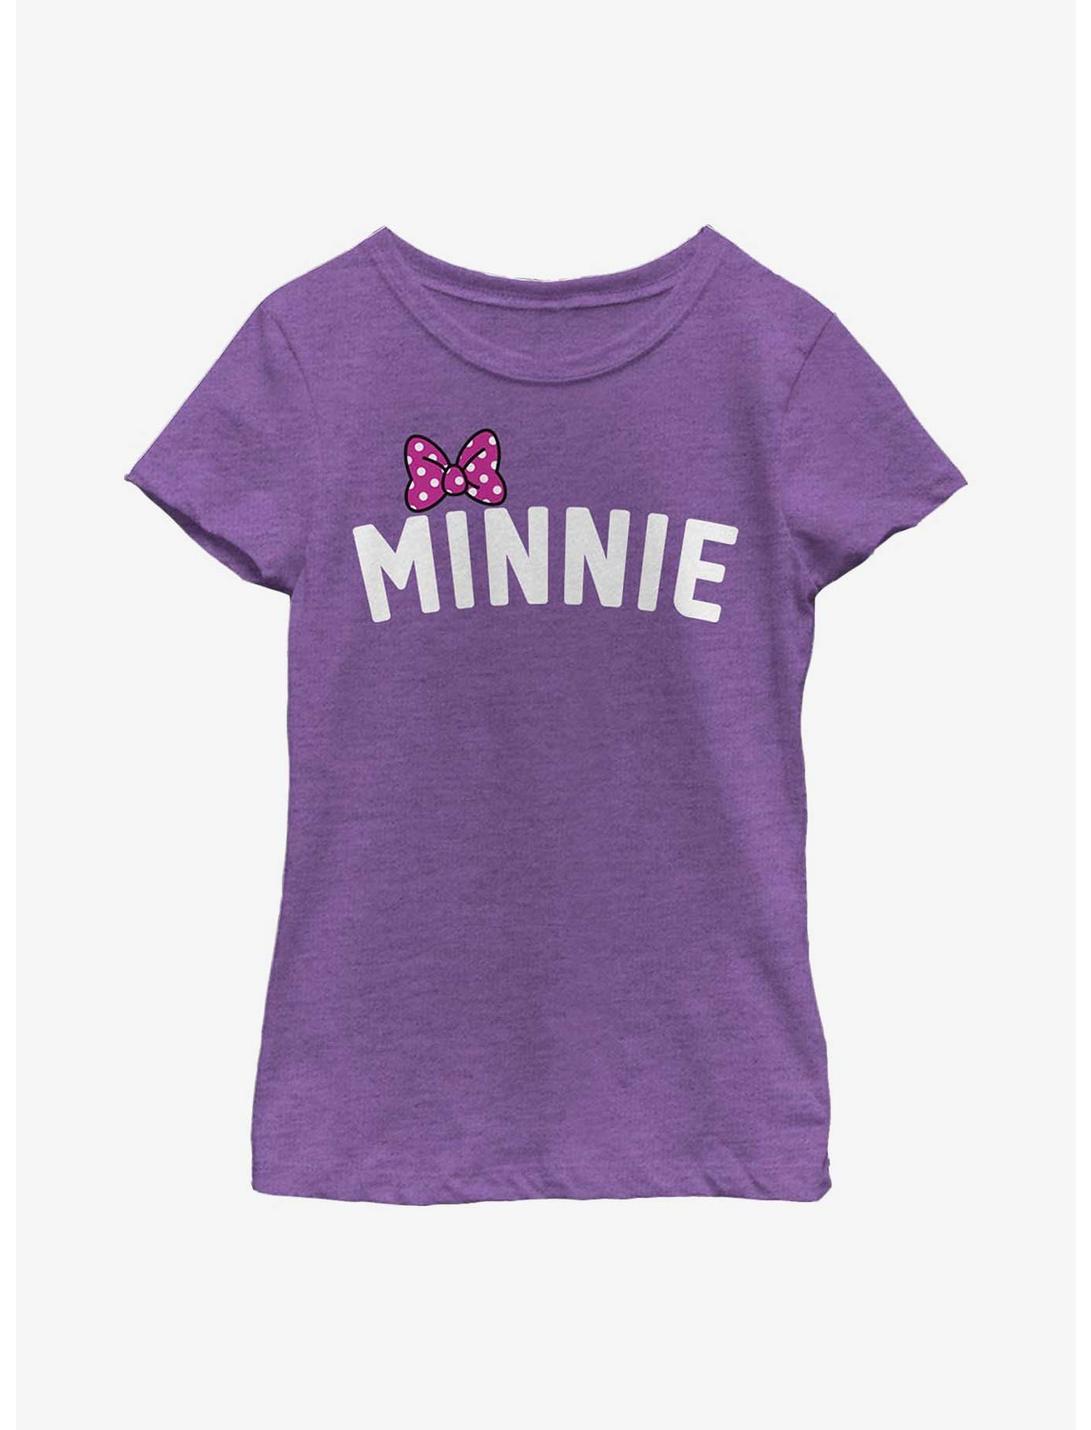 Disney Minnie Mouse Minnie Bow Chest Youth Girls T-Shirt, PURPLE BERRY, hi-res